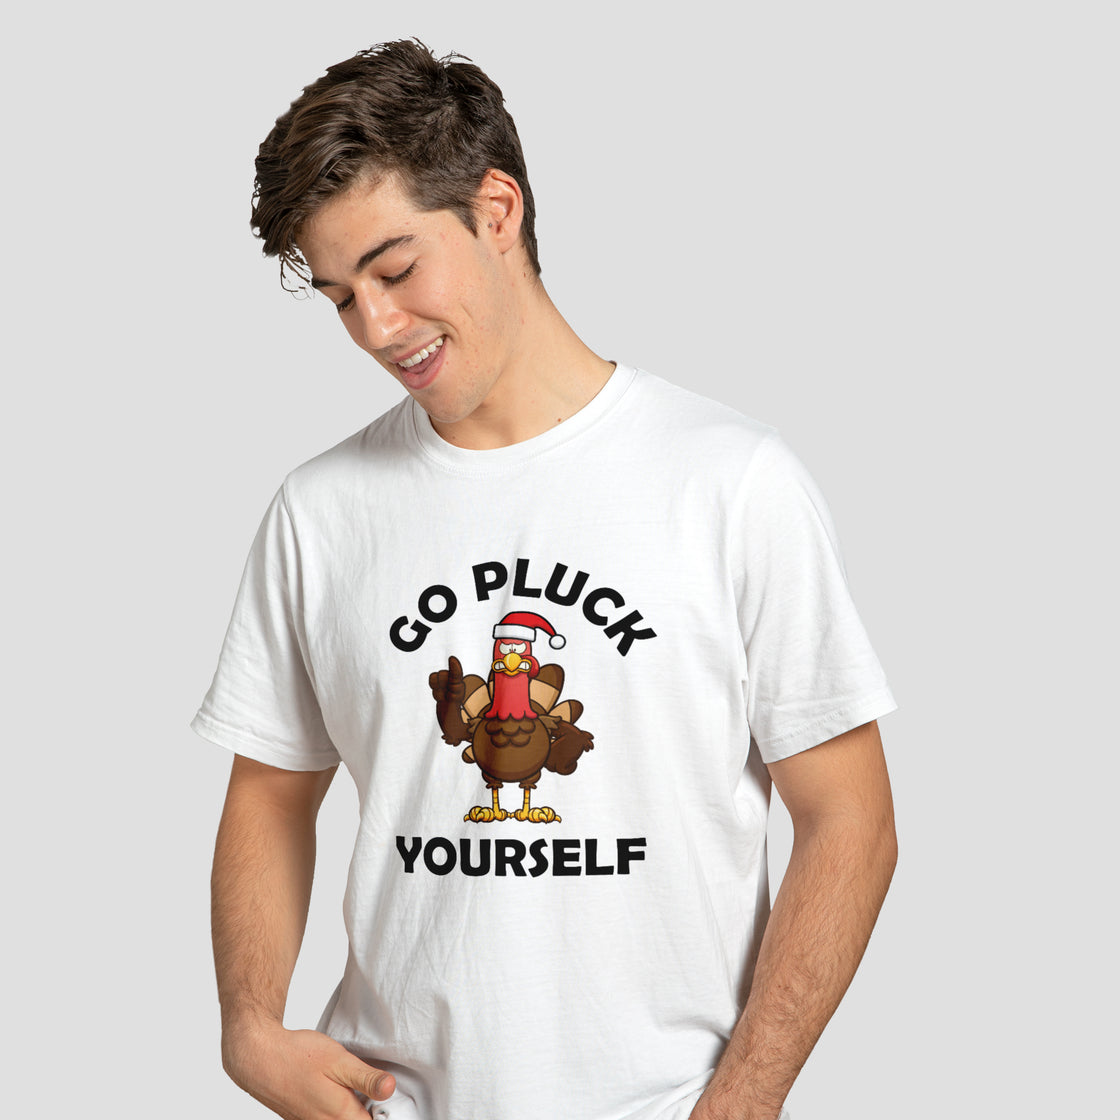 Go Pluck Yourself - T-Shirt - Custom Gifts 